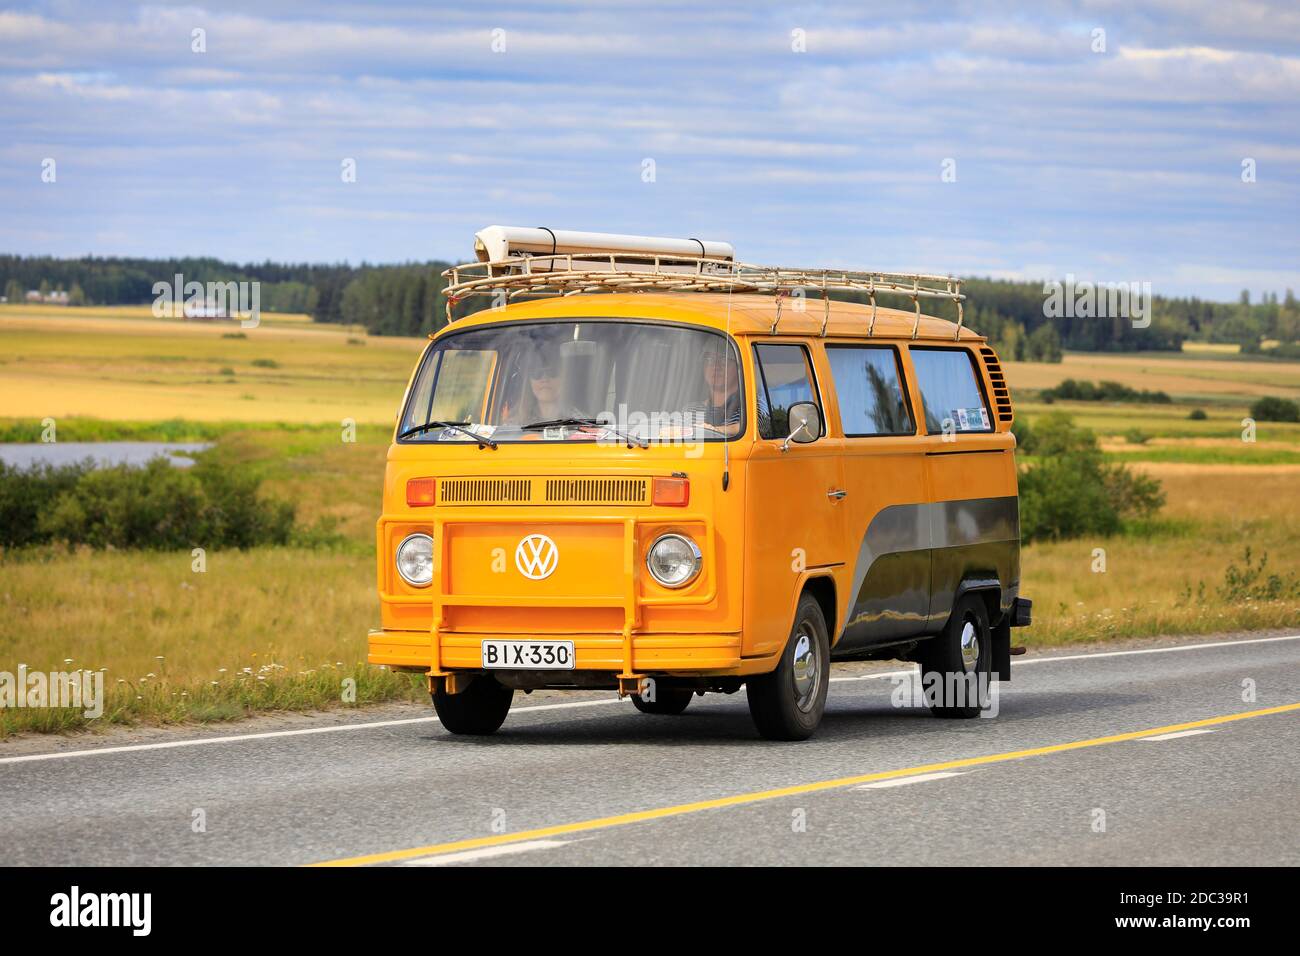 Yellow grey Volkswagen VW Type 2 camper van with grille guard and luggage rack on Maisemaruise 2019 car cruise. Vaulammi, Finland. August 3, 2019. Stock Photo